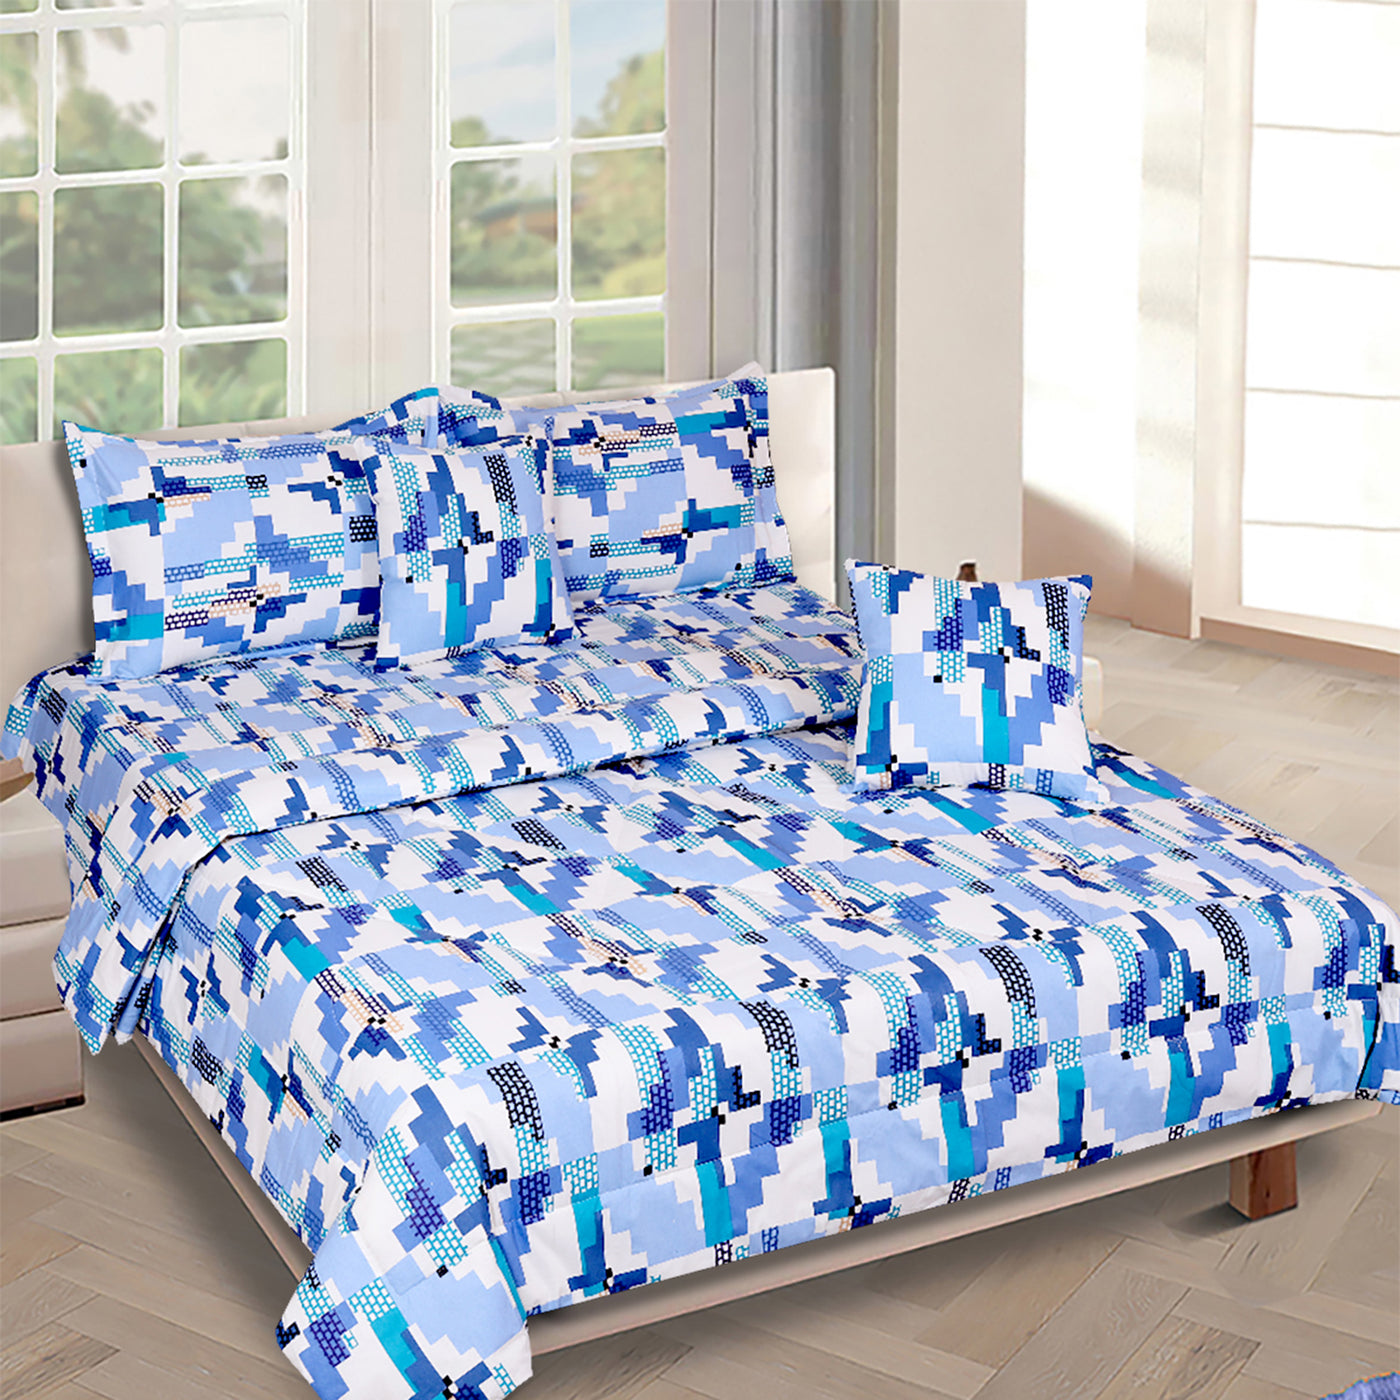 Blue & White Geometric Printed Cotton Double Queen Bedding Set With Pillow Cover